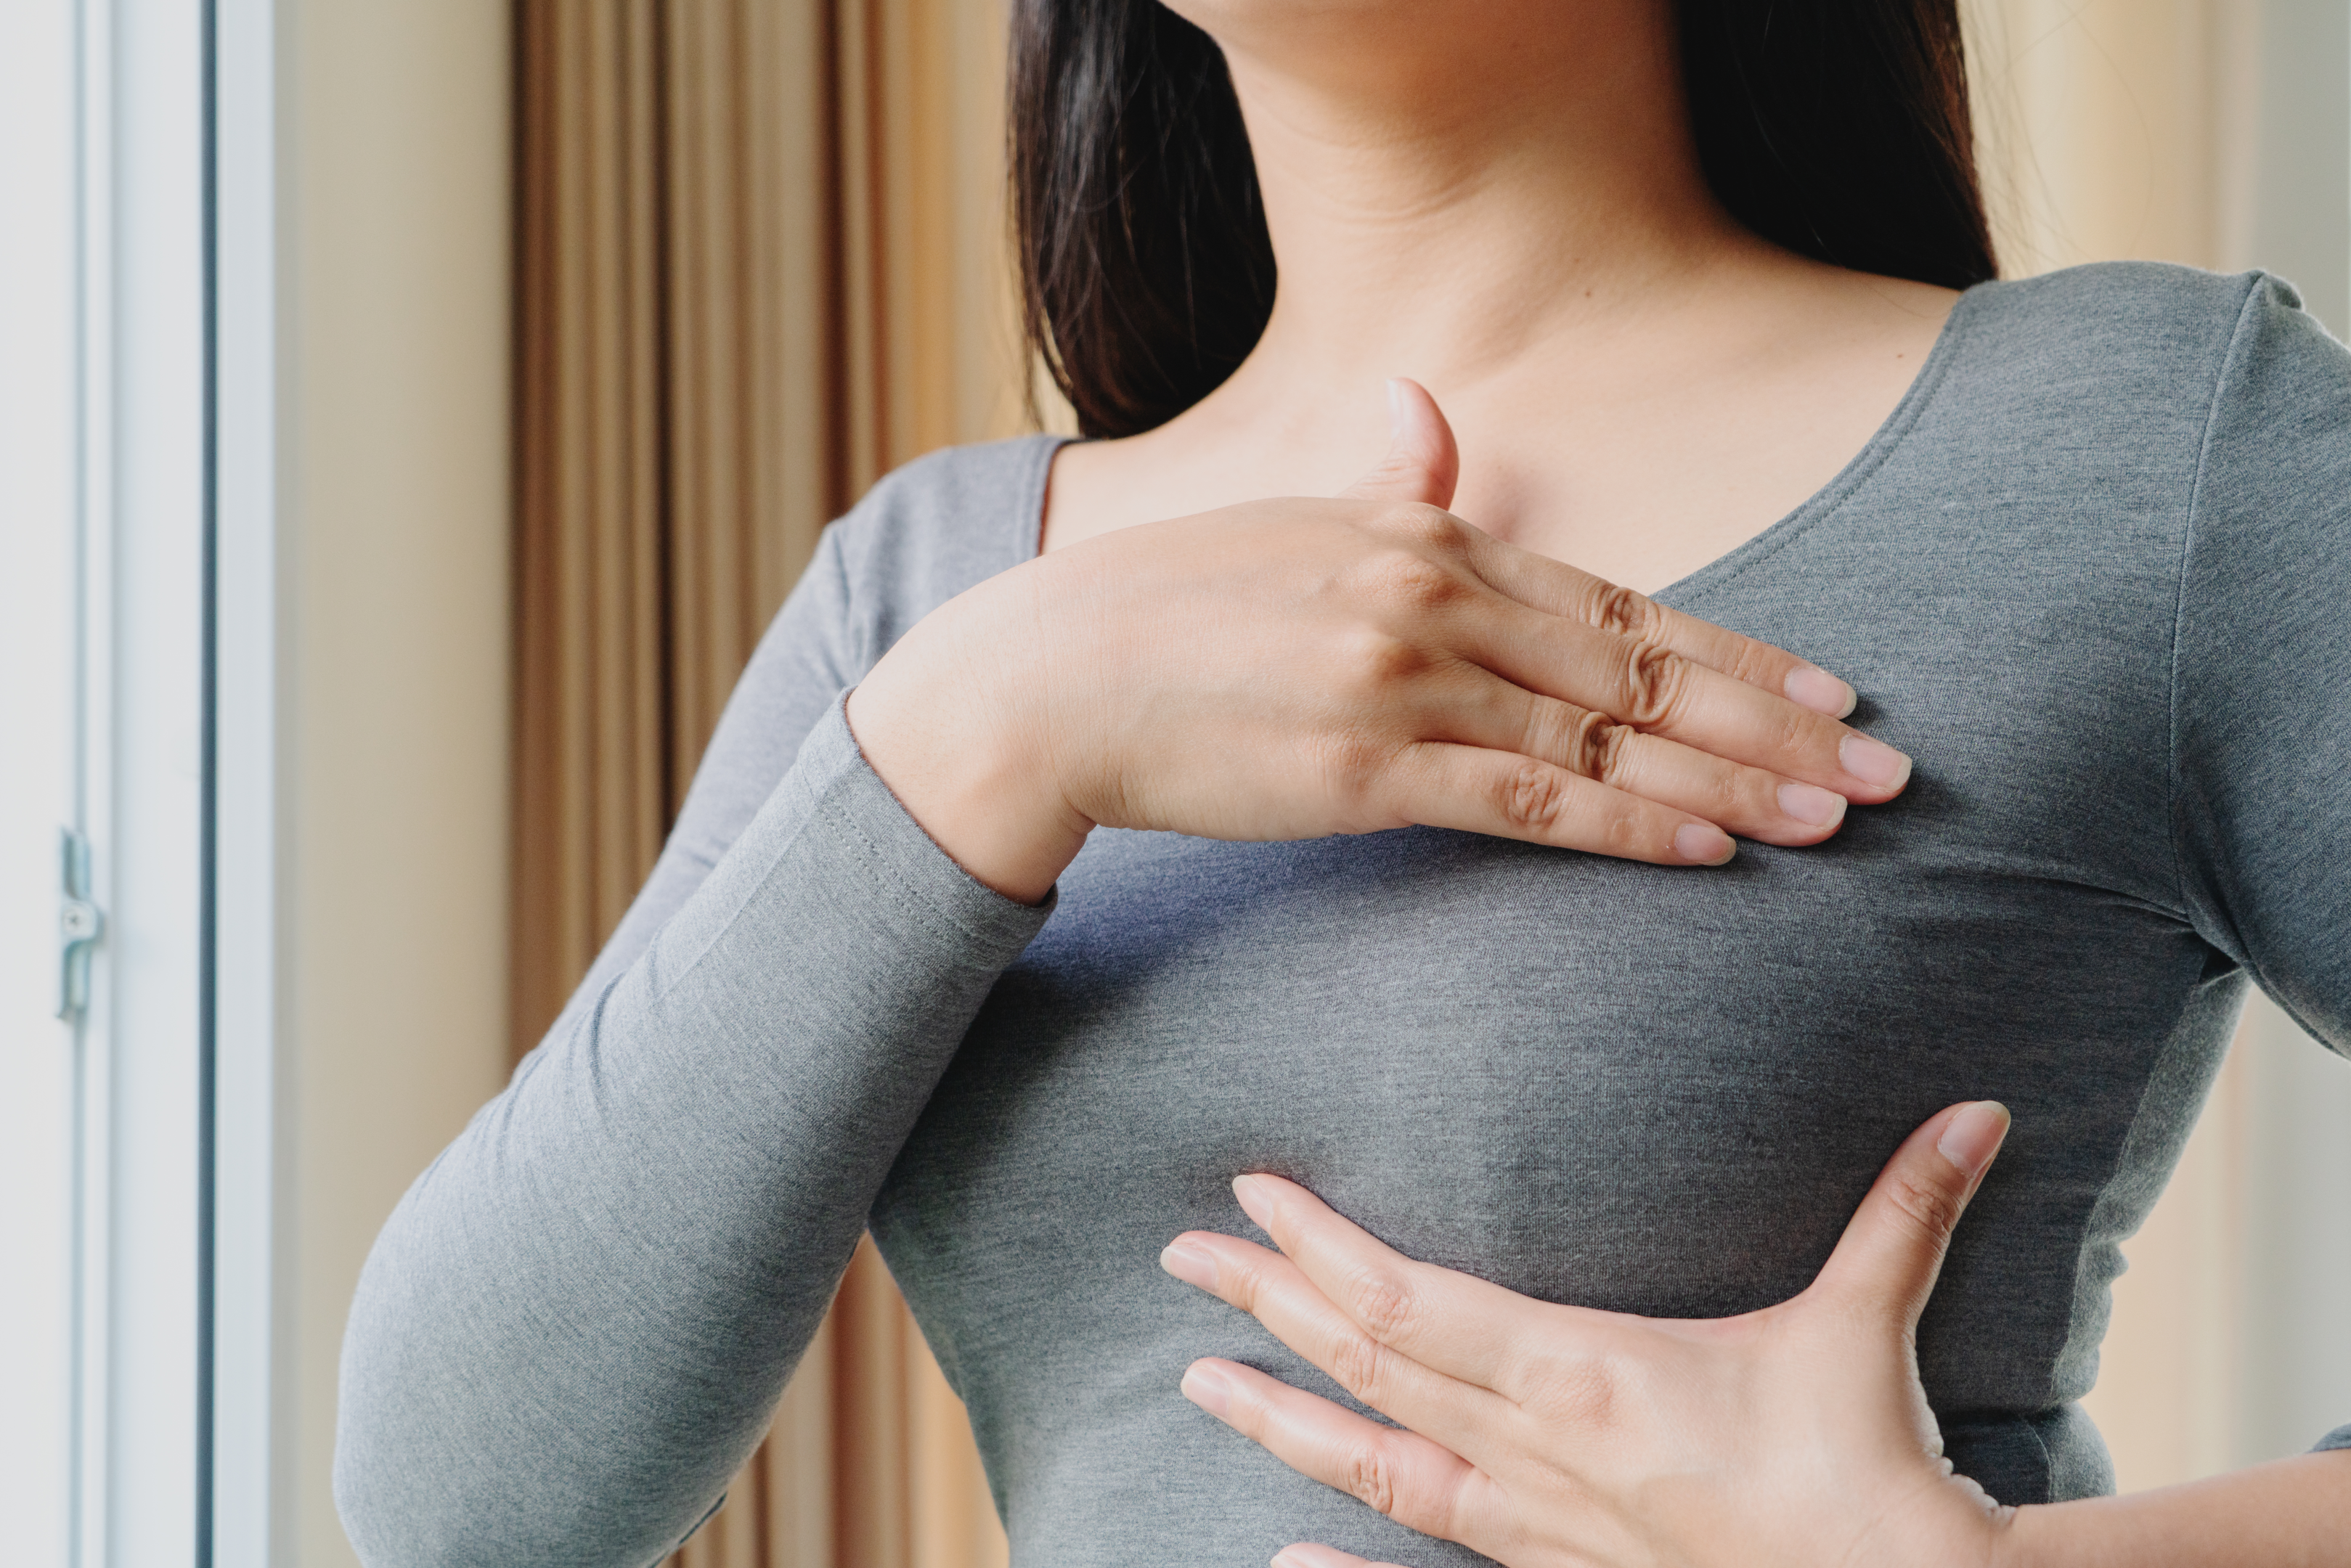 sharp pain in one or both breasts or a breast injury may be the caise of chest pain 